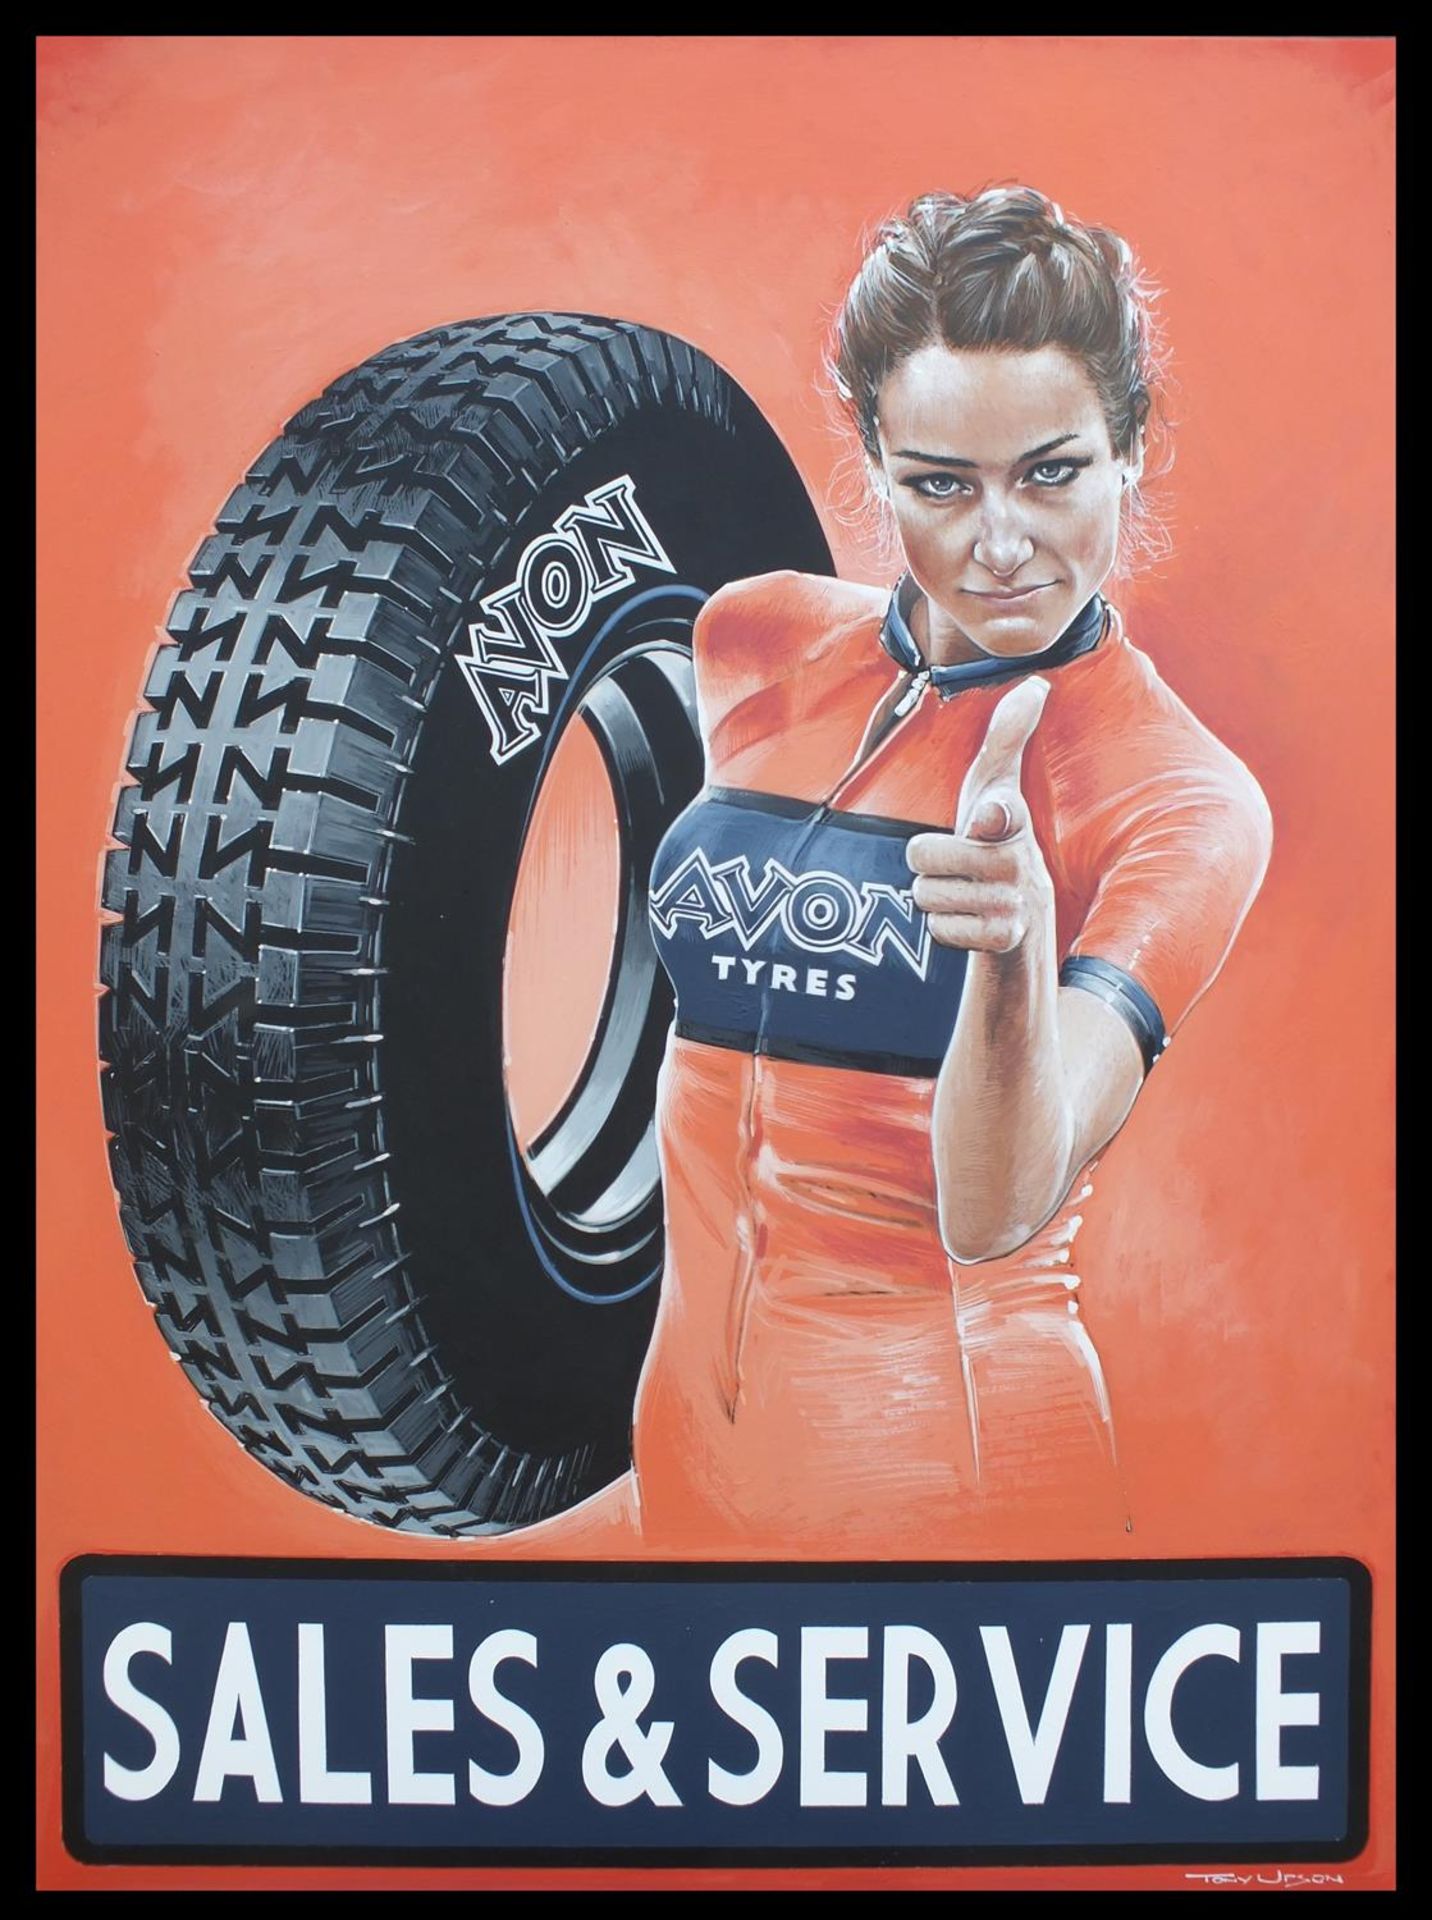 Avon Tyres-Sales and Service. Acrylic on Canvas by Tony Upson - Image 2 of 2